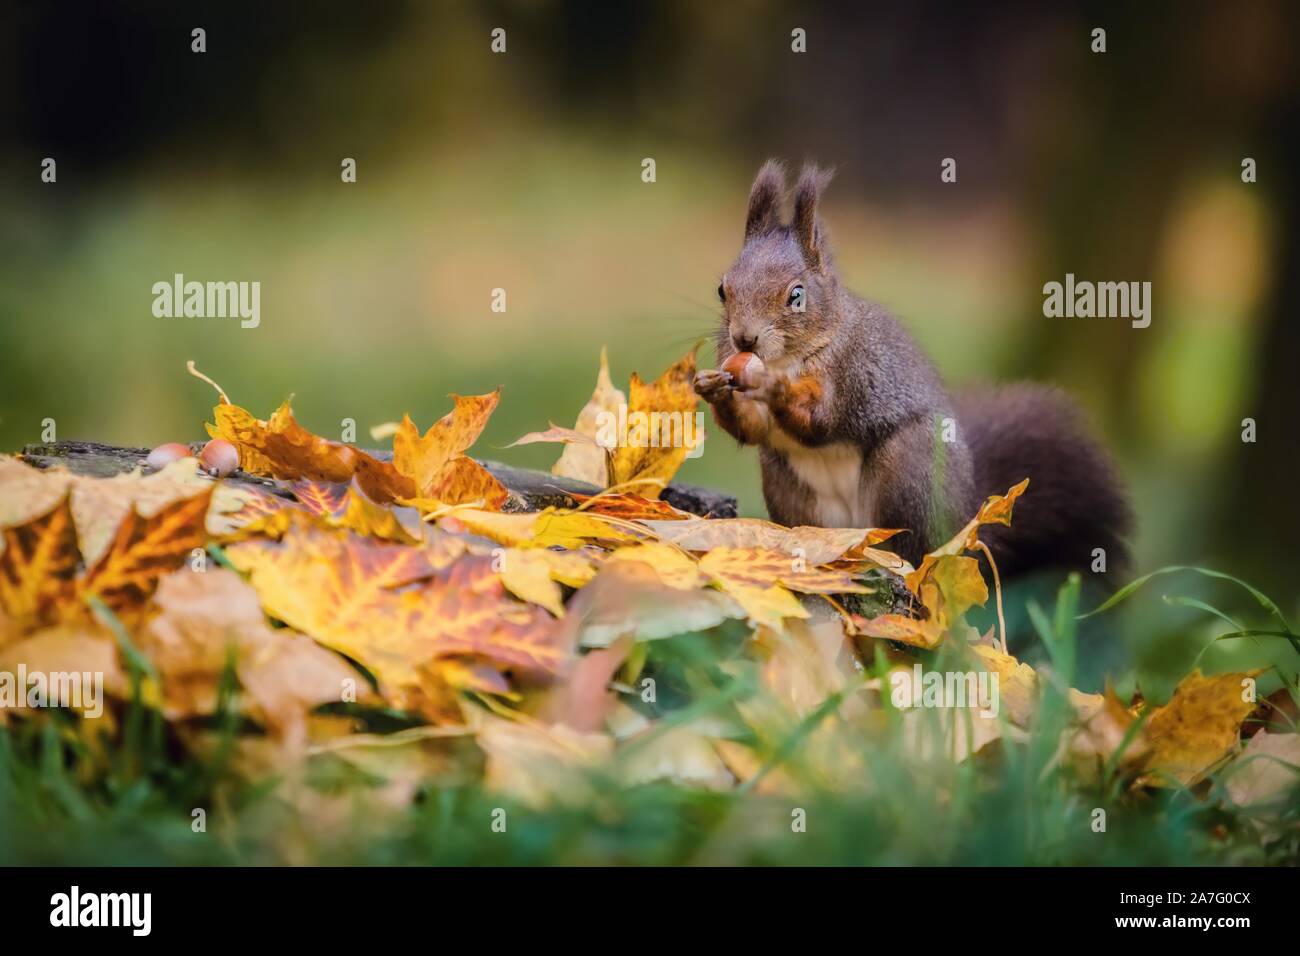 Hungry Eurasian red squirrel sitting on a tree stump covered with colorful leaves holding hazelnut in its paws. Autumn day in a deep forest. Stock Photo